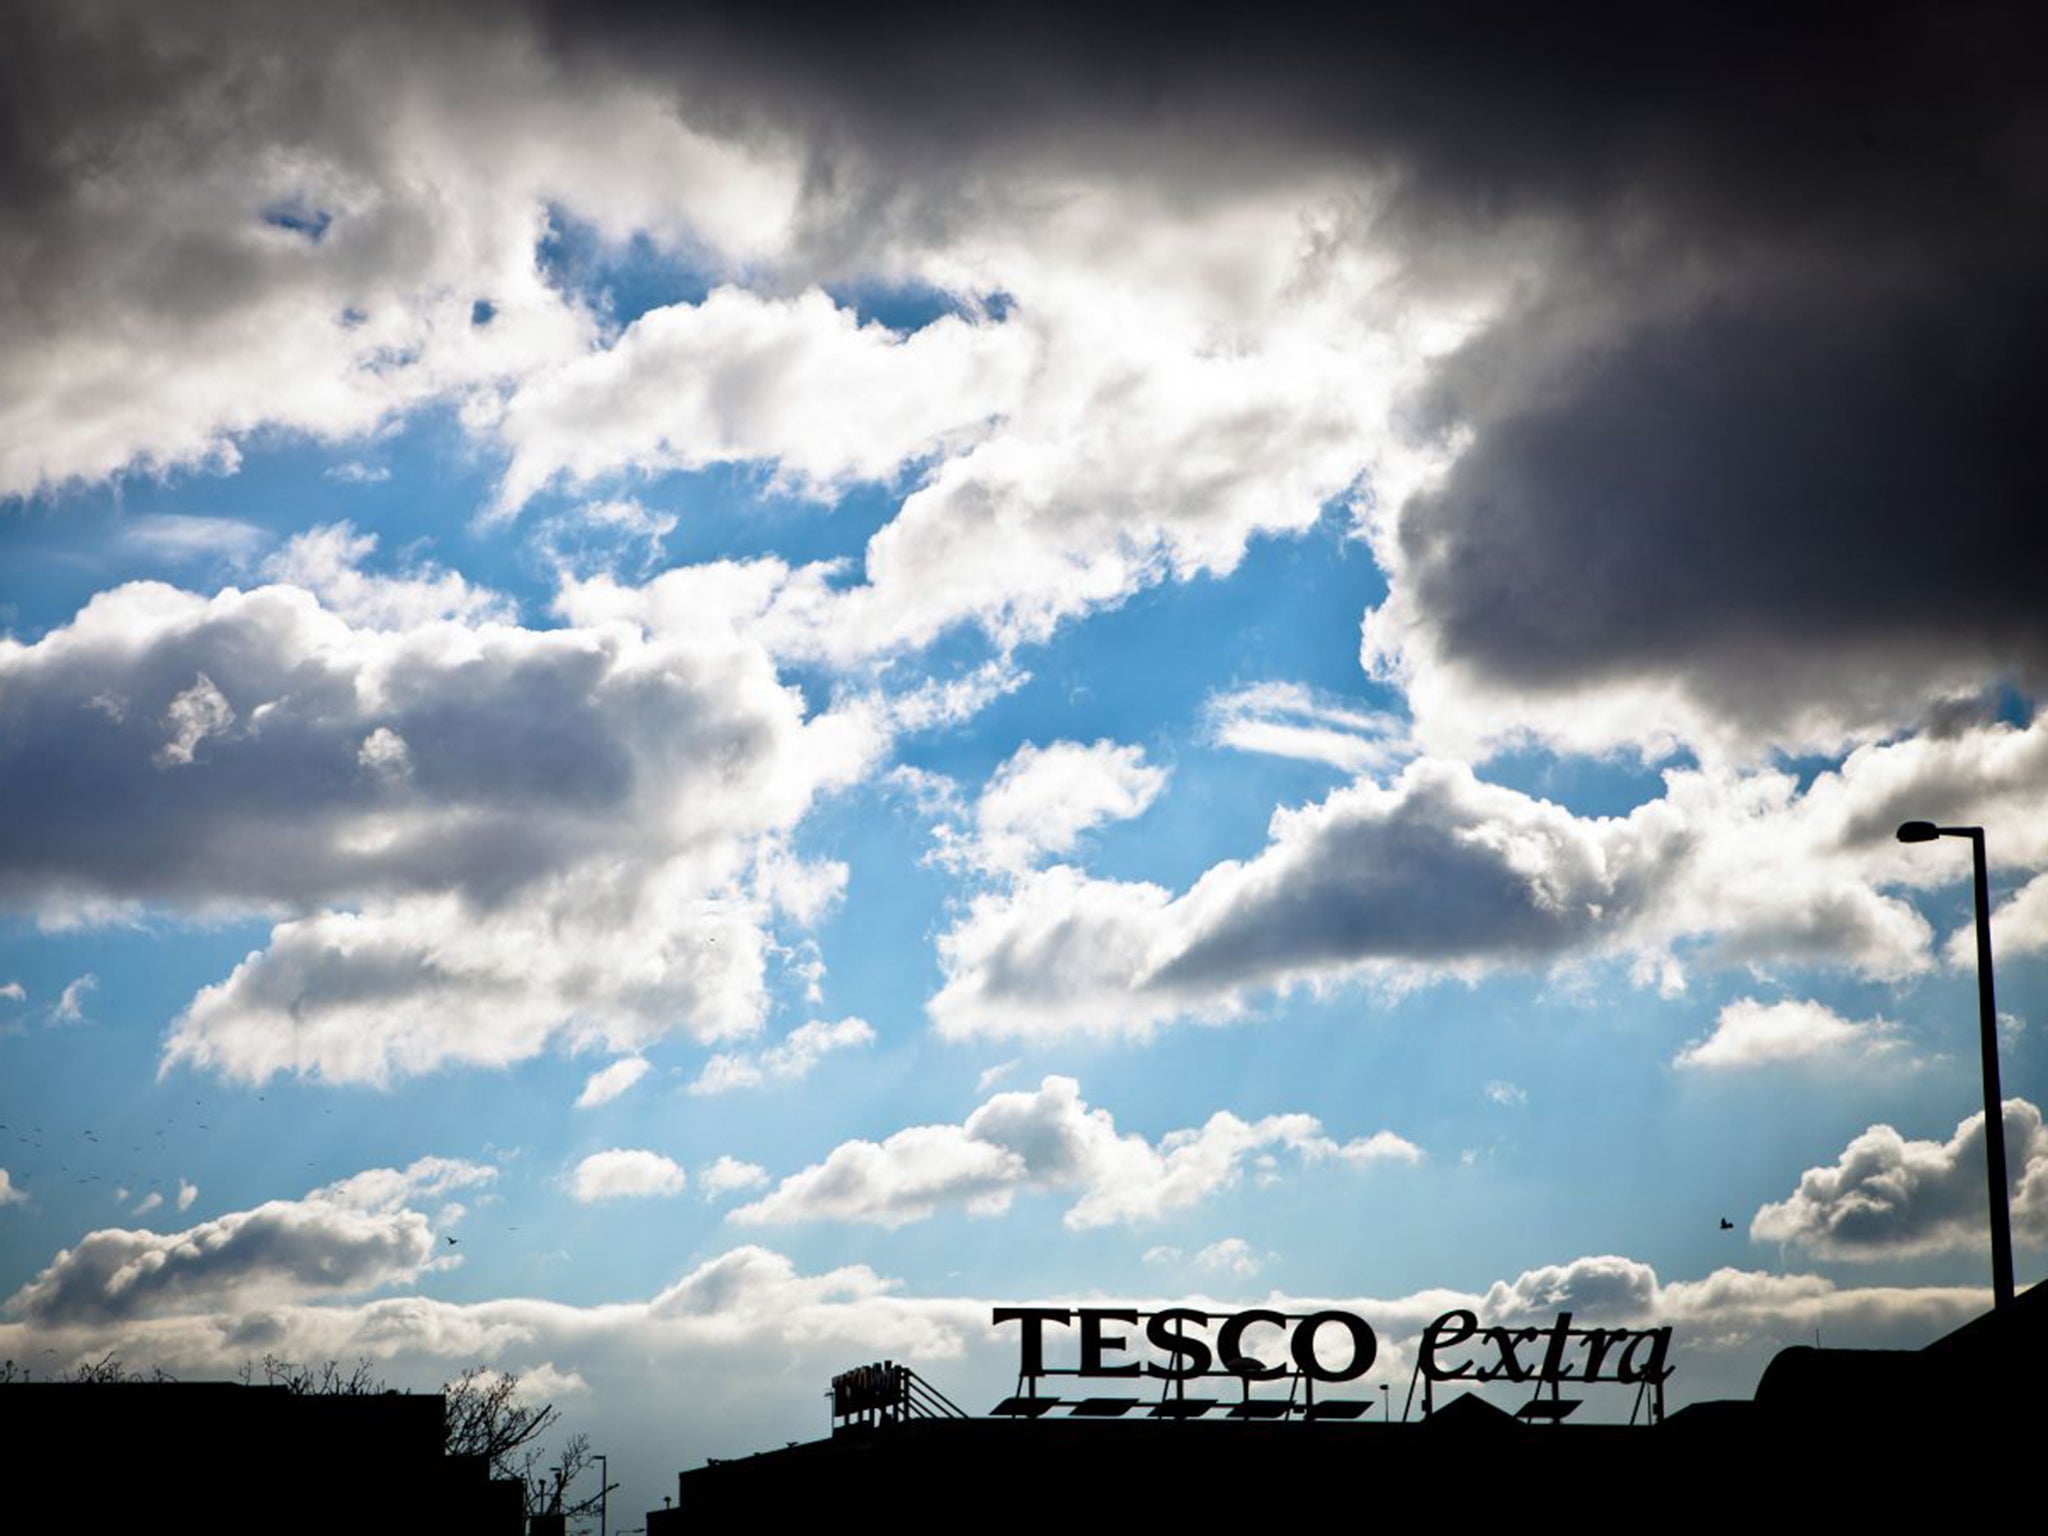 In 2014, Tesco lost half its value